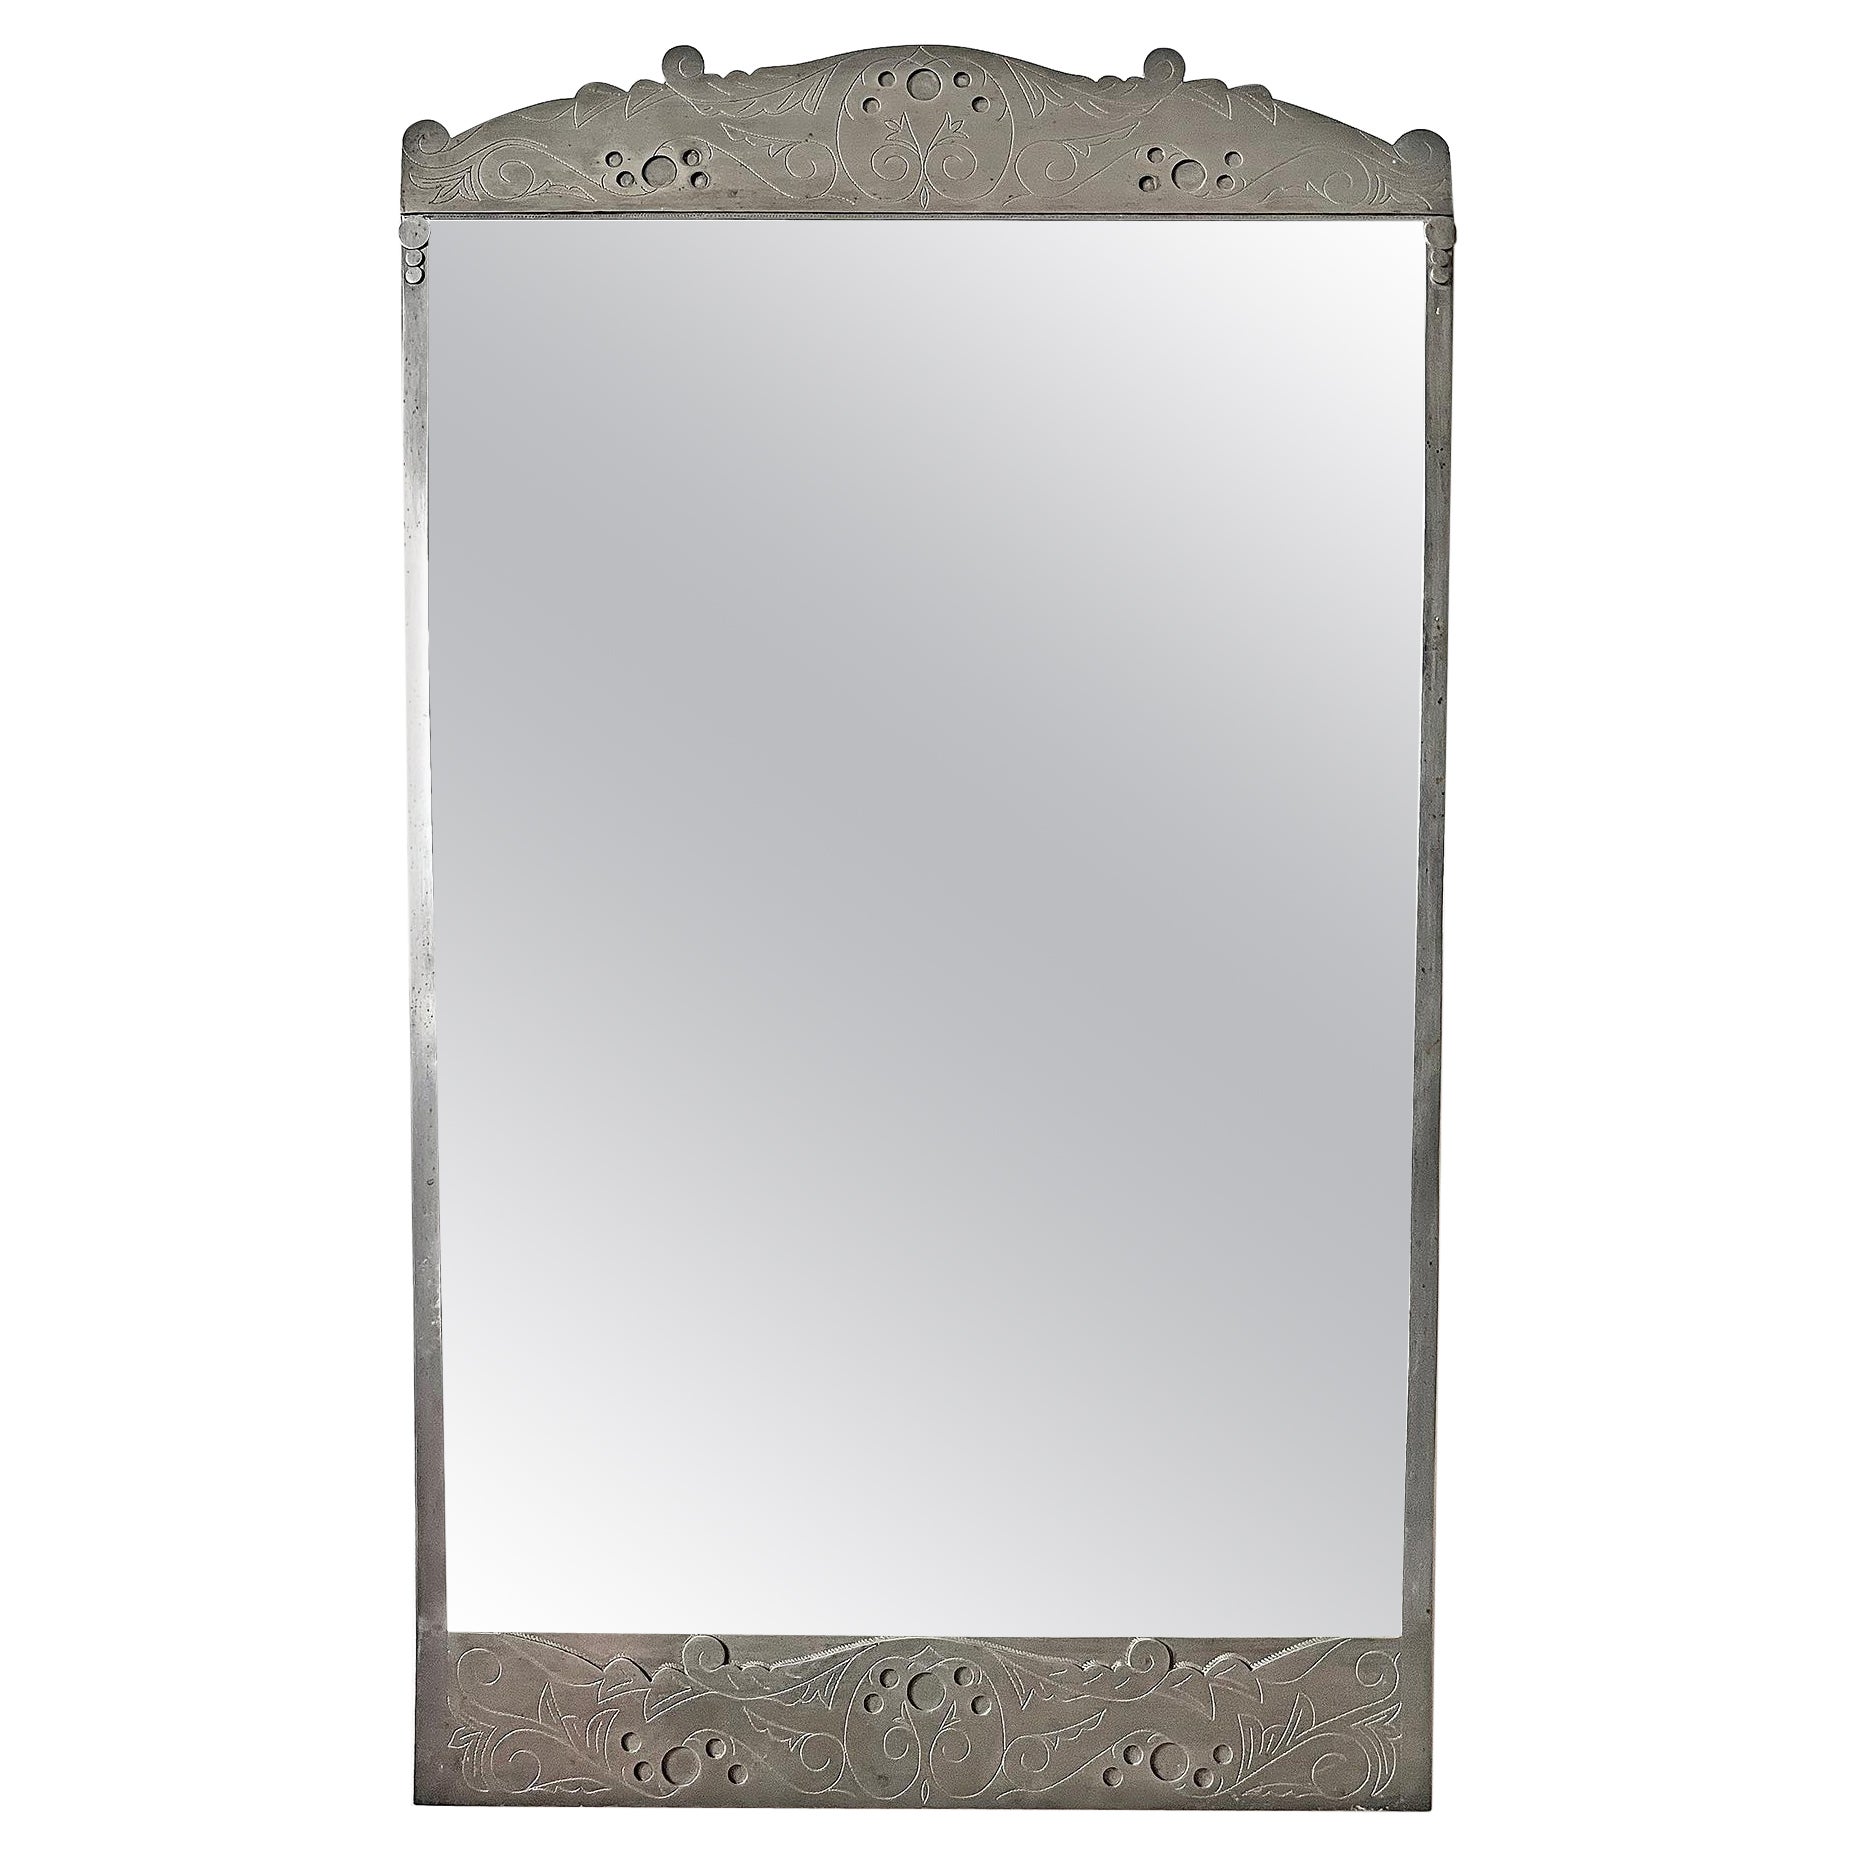 Swedish Modern Wall Mirror in Pewter from CAM, 1929 For Sale